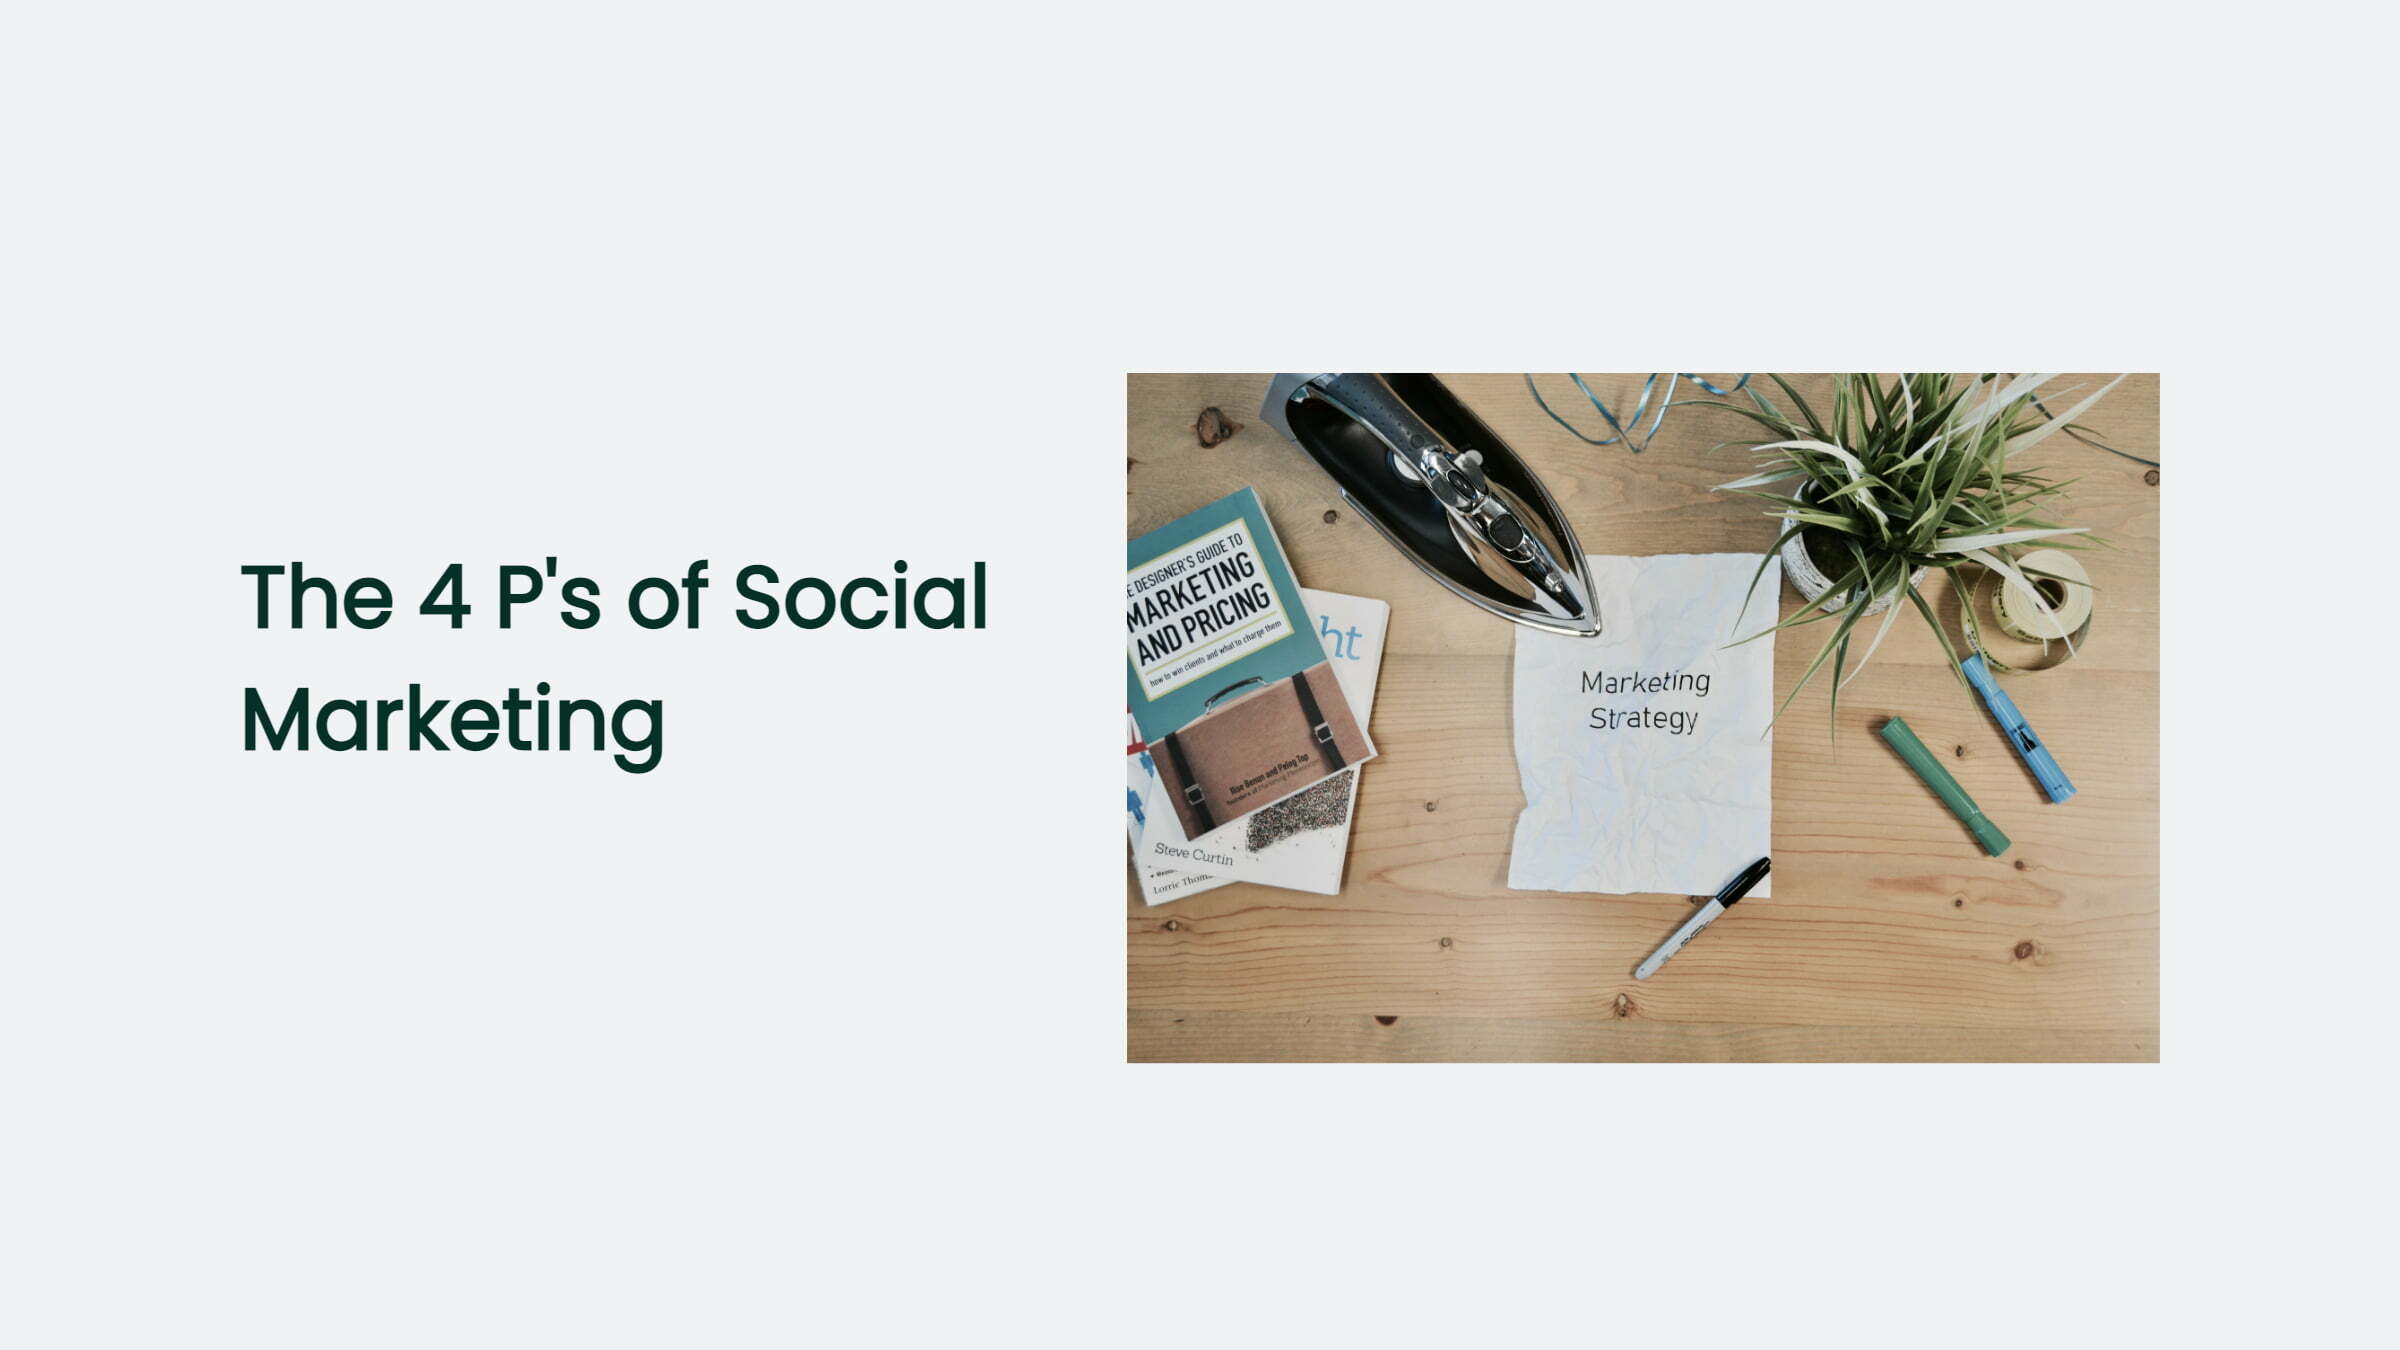 What Are The 4 P'S Of Social Marketing